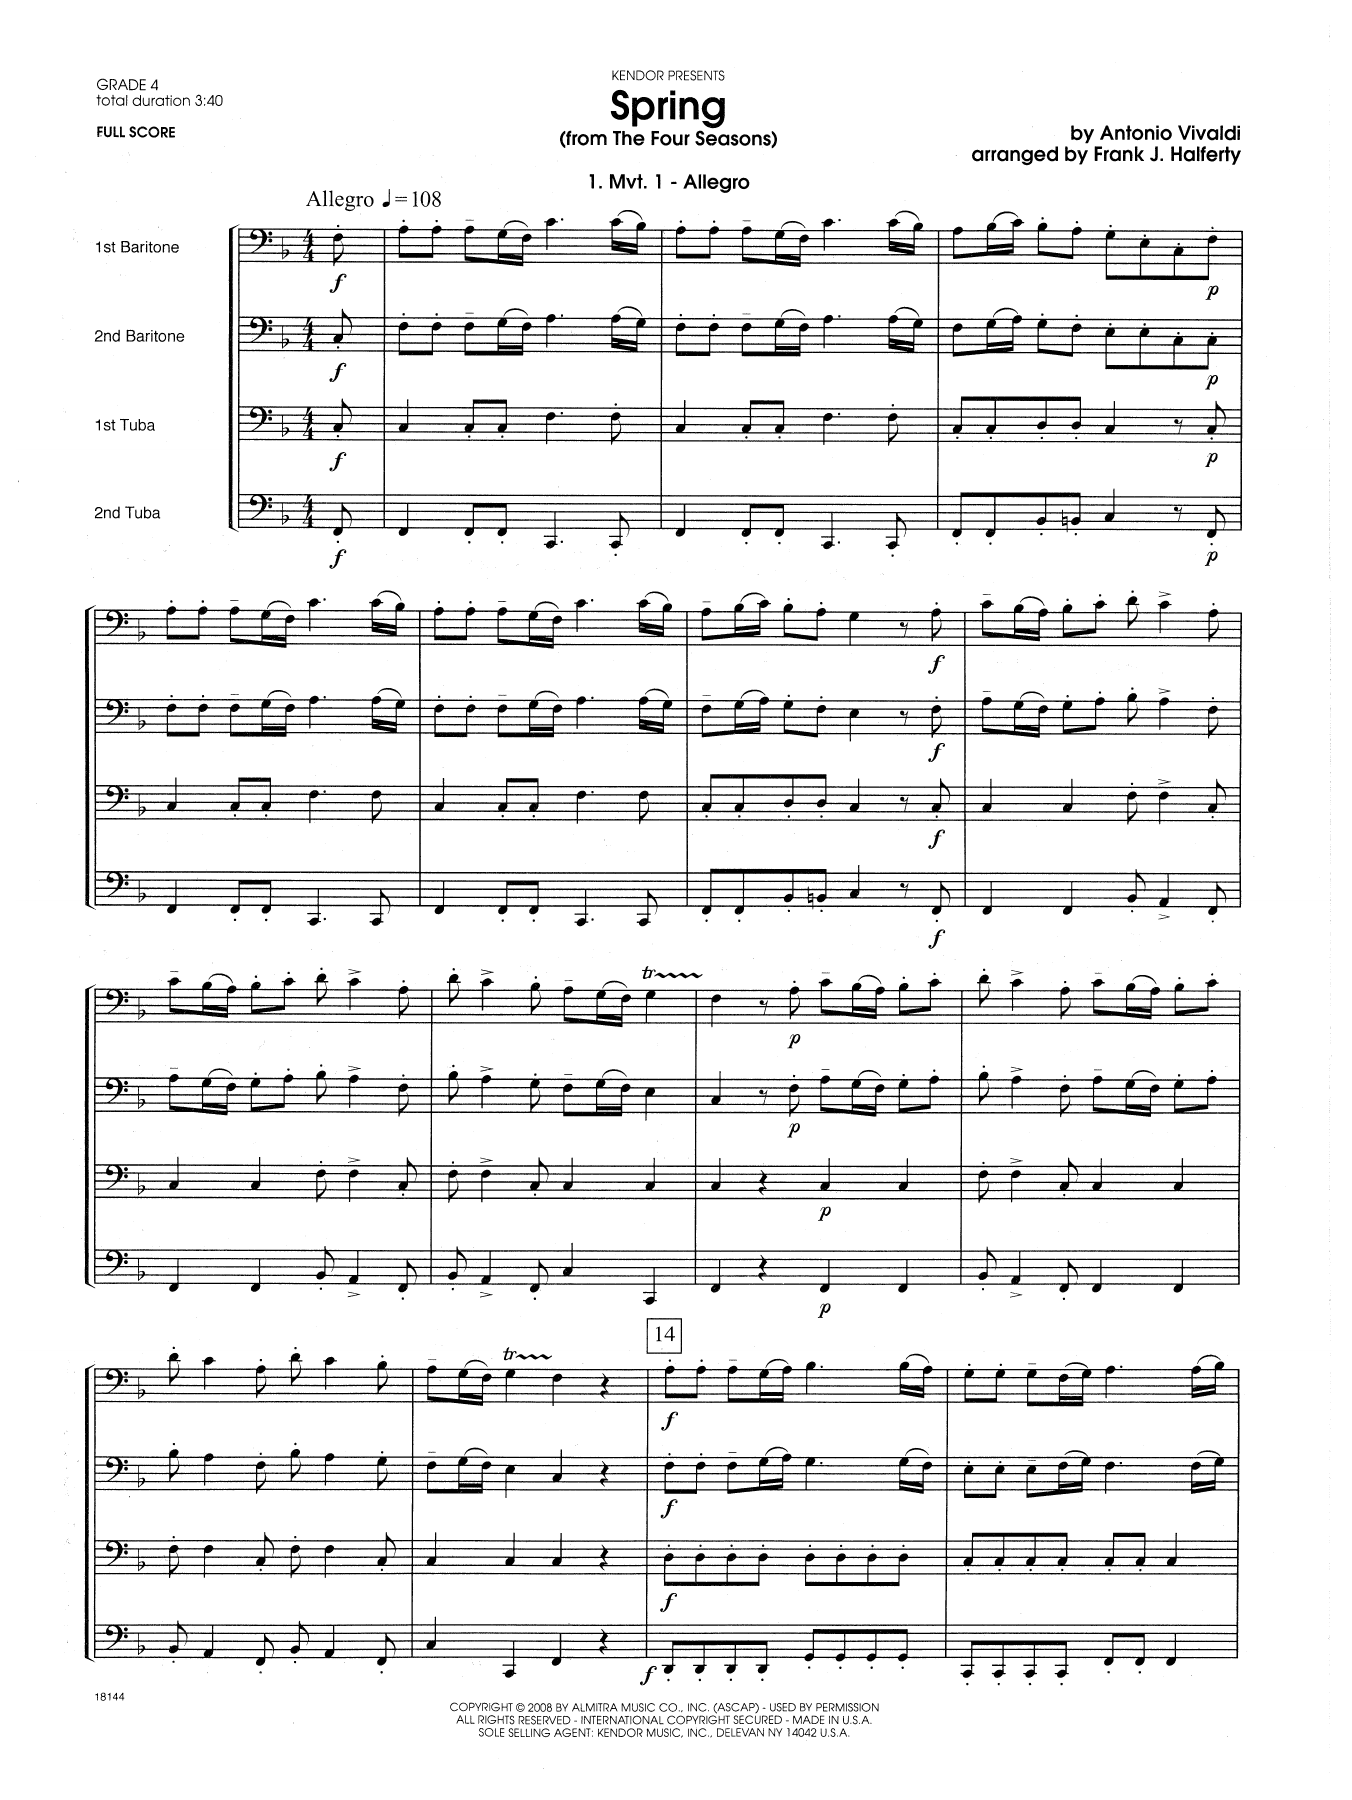 Download Frank J. Halferty Spring (from The Four Seasons) - Full S Sheet Music